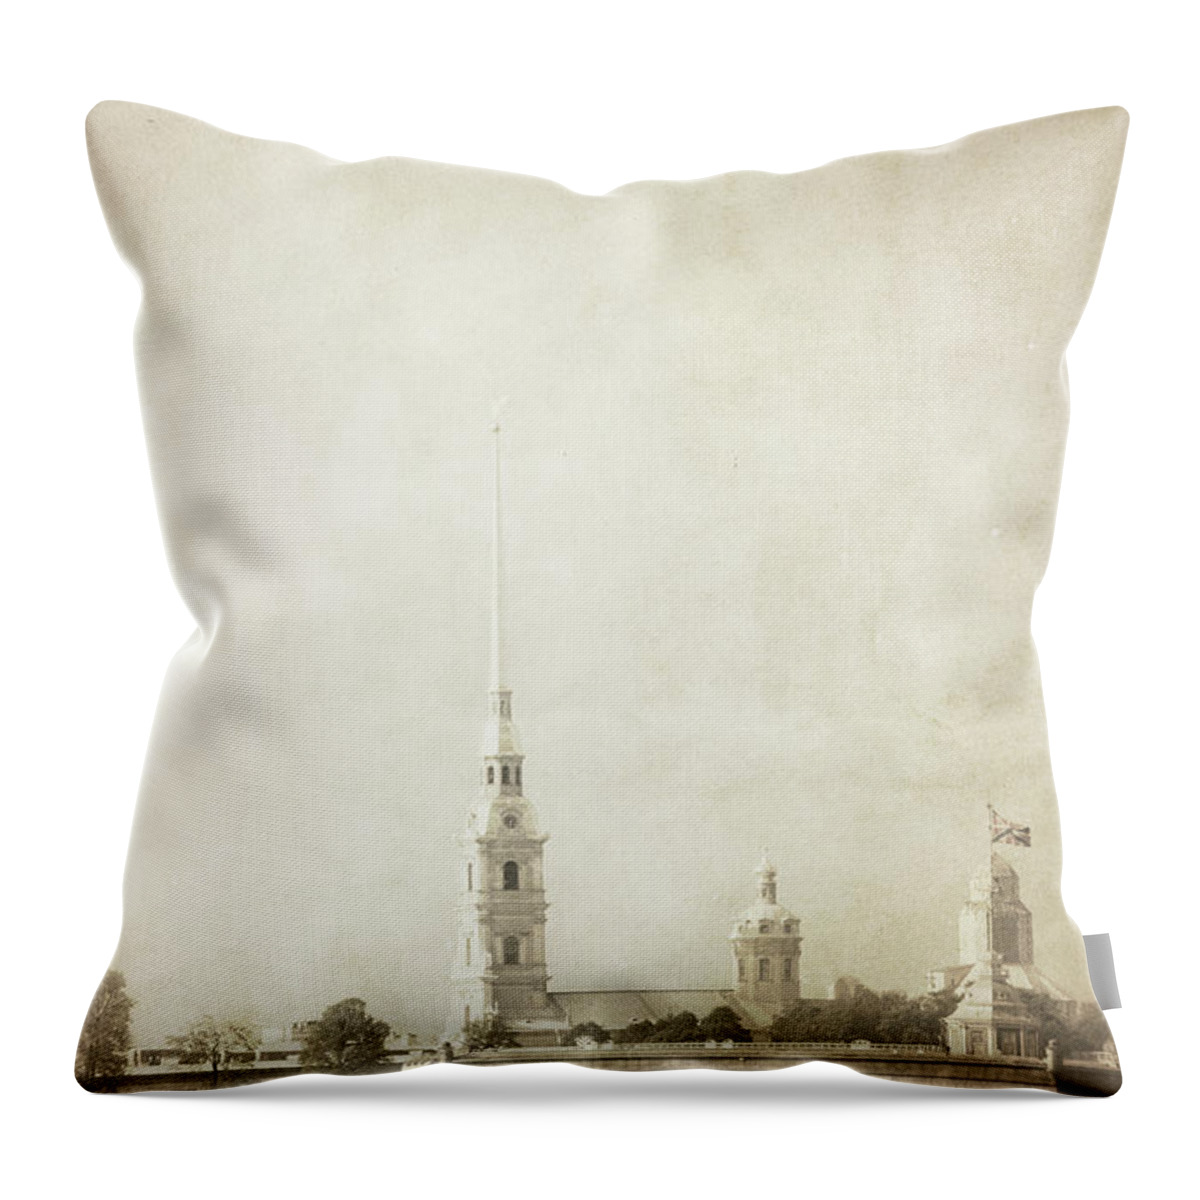 Aging Process Throw Pillow featuring the photograph Peter And Poul Fortress by Schus